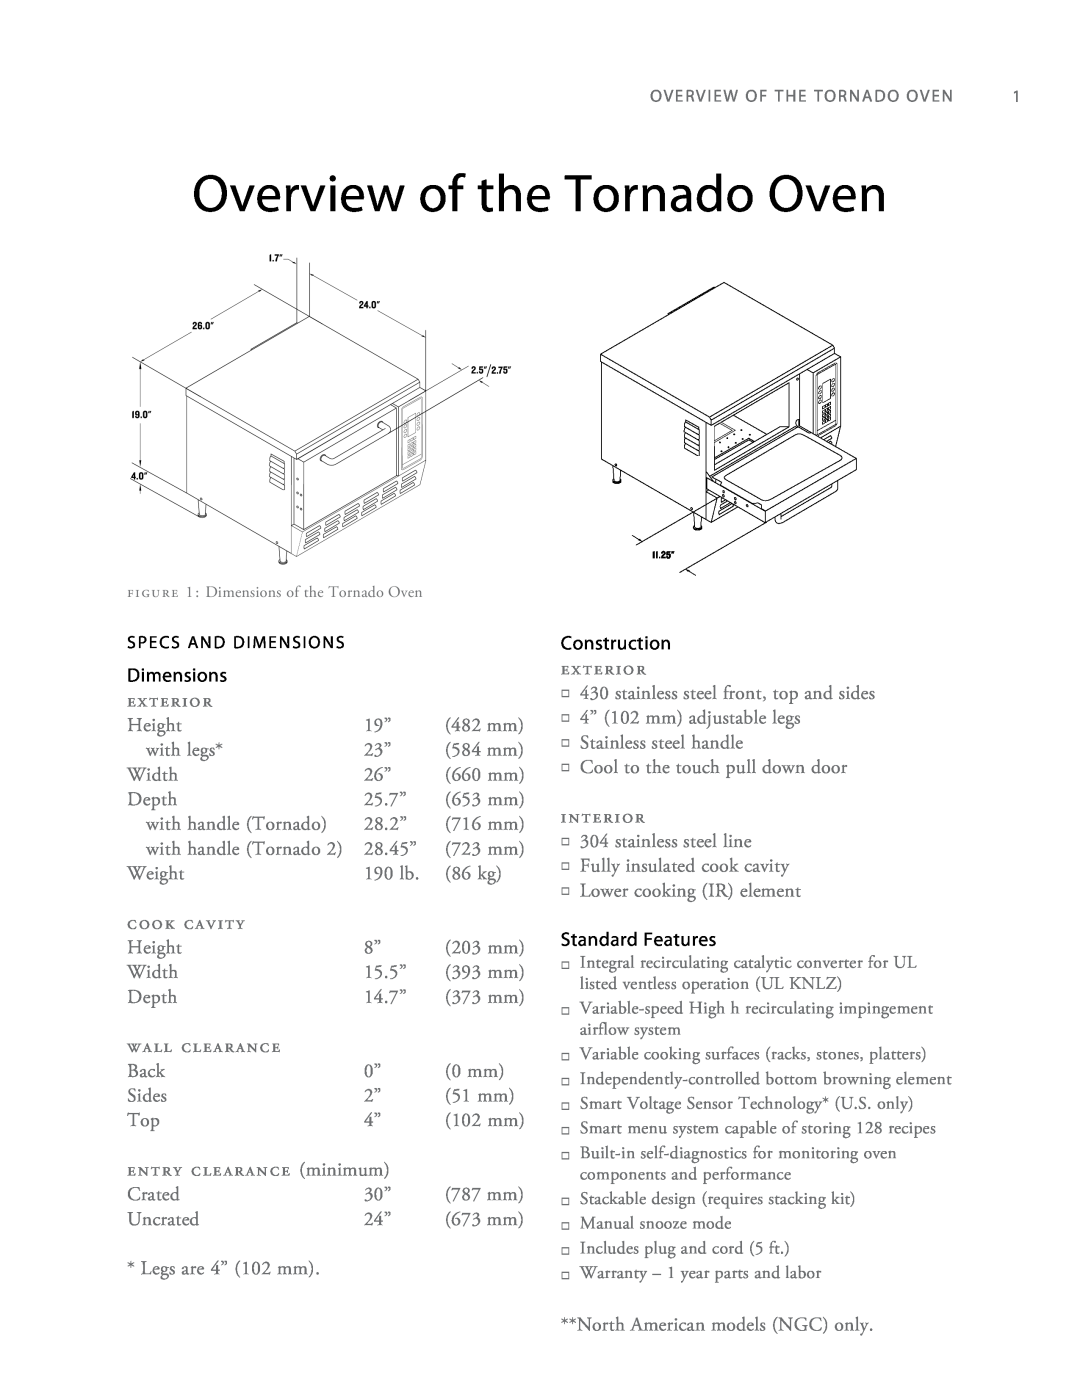 Turbo Chef Technologies Tornado 2 owner manual Overview of the Tornado Oven, Dimensions 